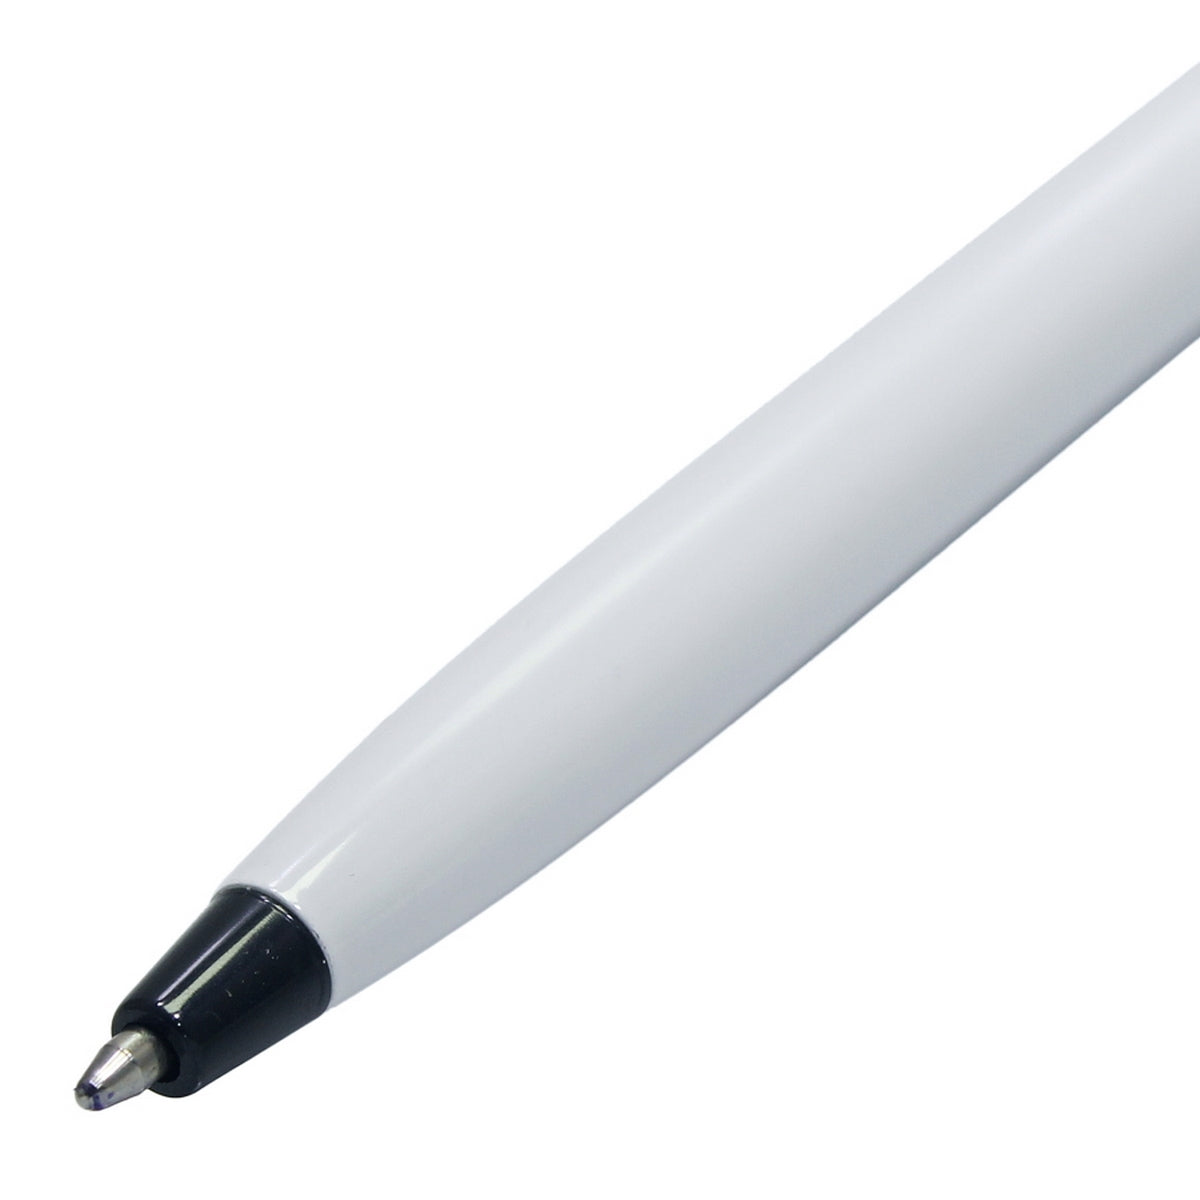 White & Black Ball Pen - For Office, College, Personal Use - Jharkhand